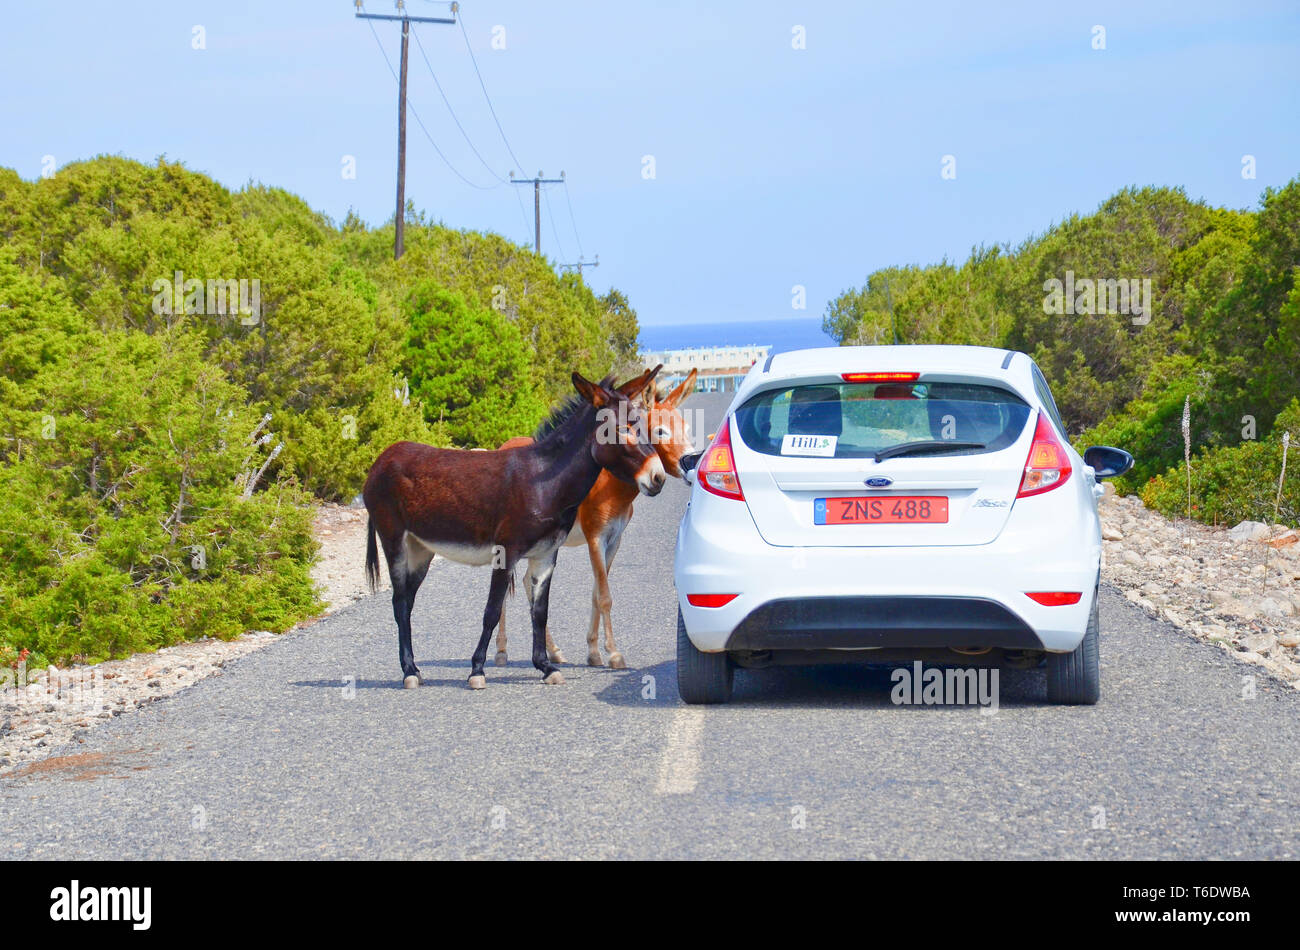 Karpaz Peninsula, Turkish Northern Cyprus - Oct 3rd 2018: Two cute donkeys standing on the countryside road by the car with tourists. Stock Photo